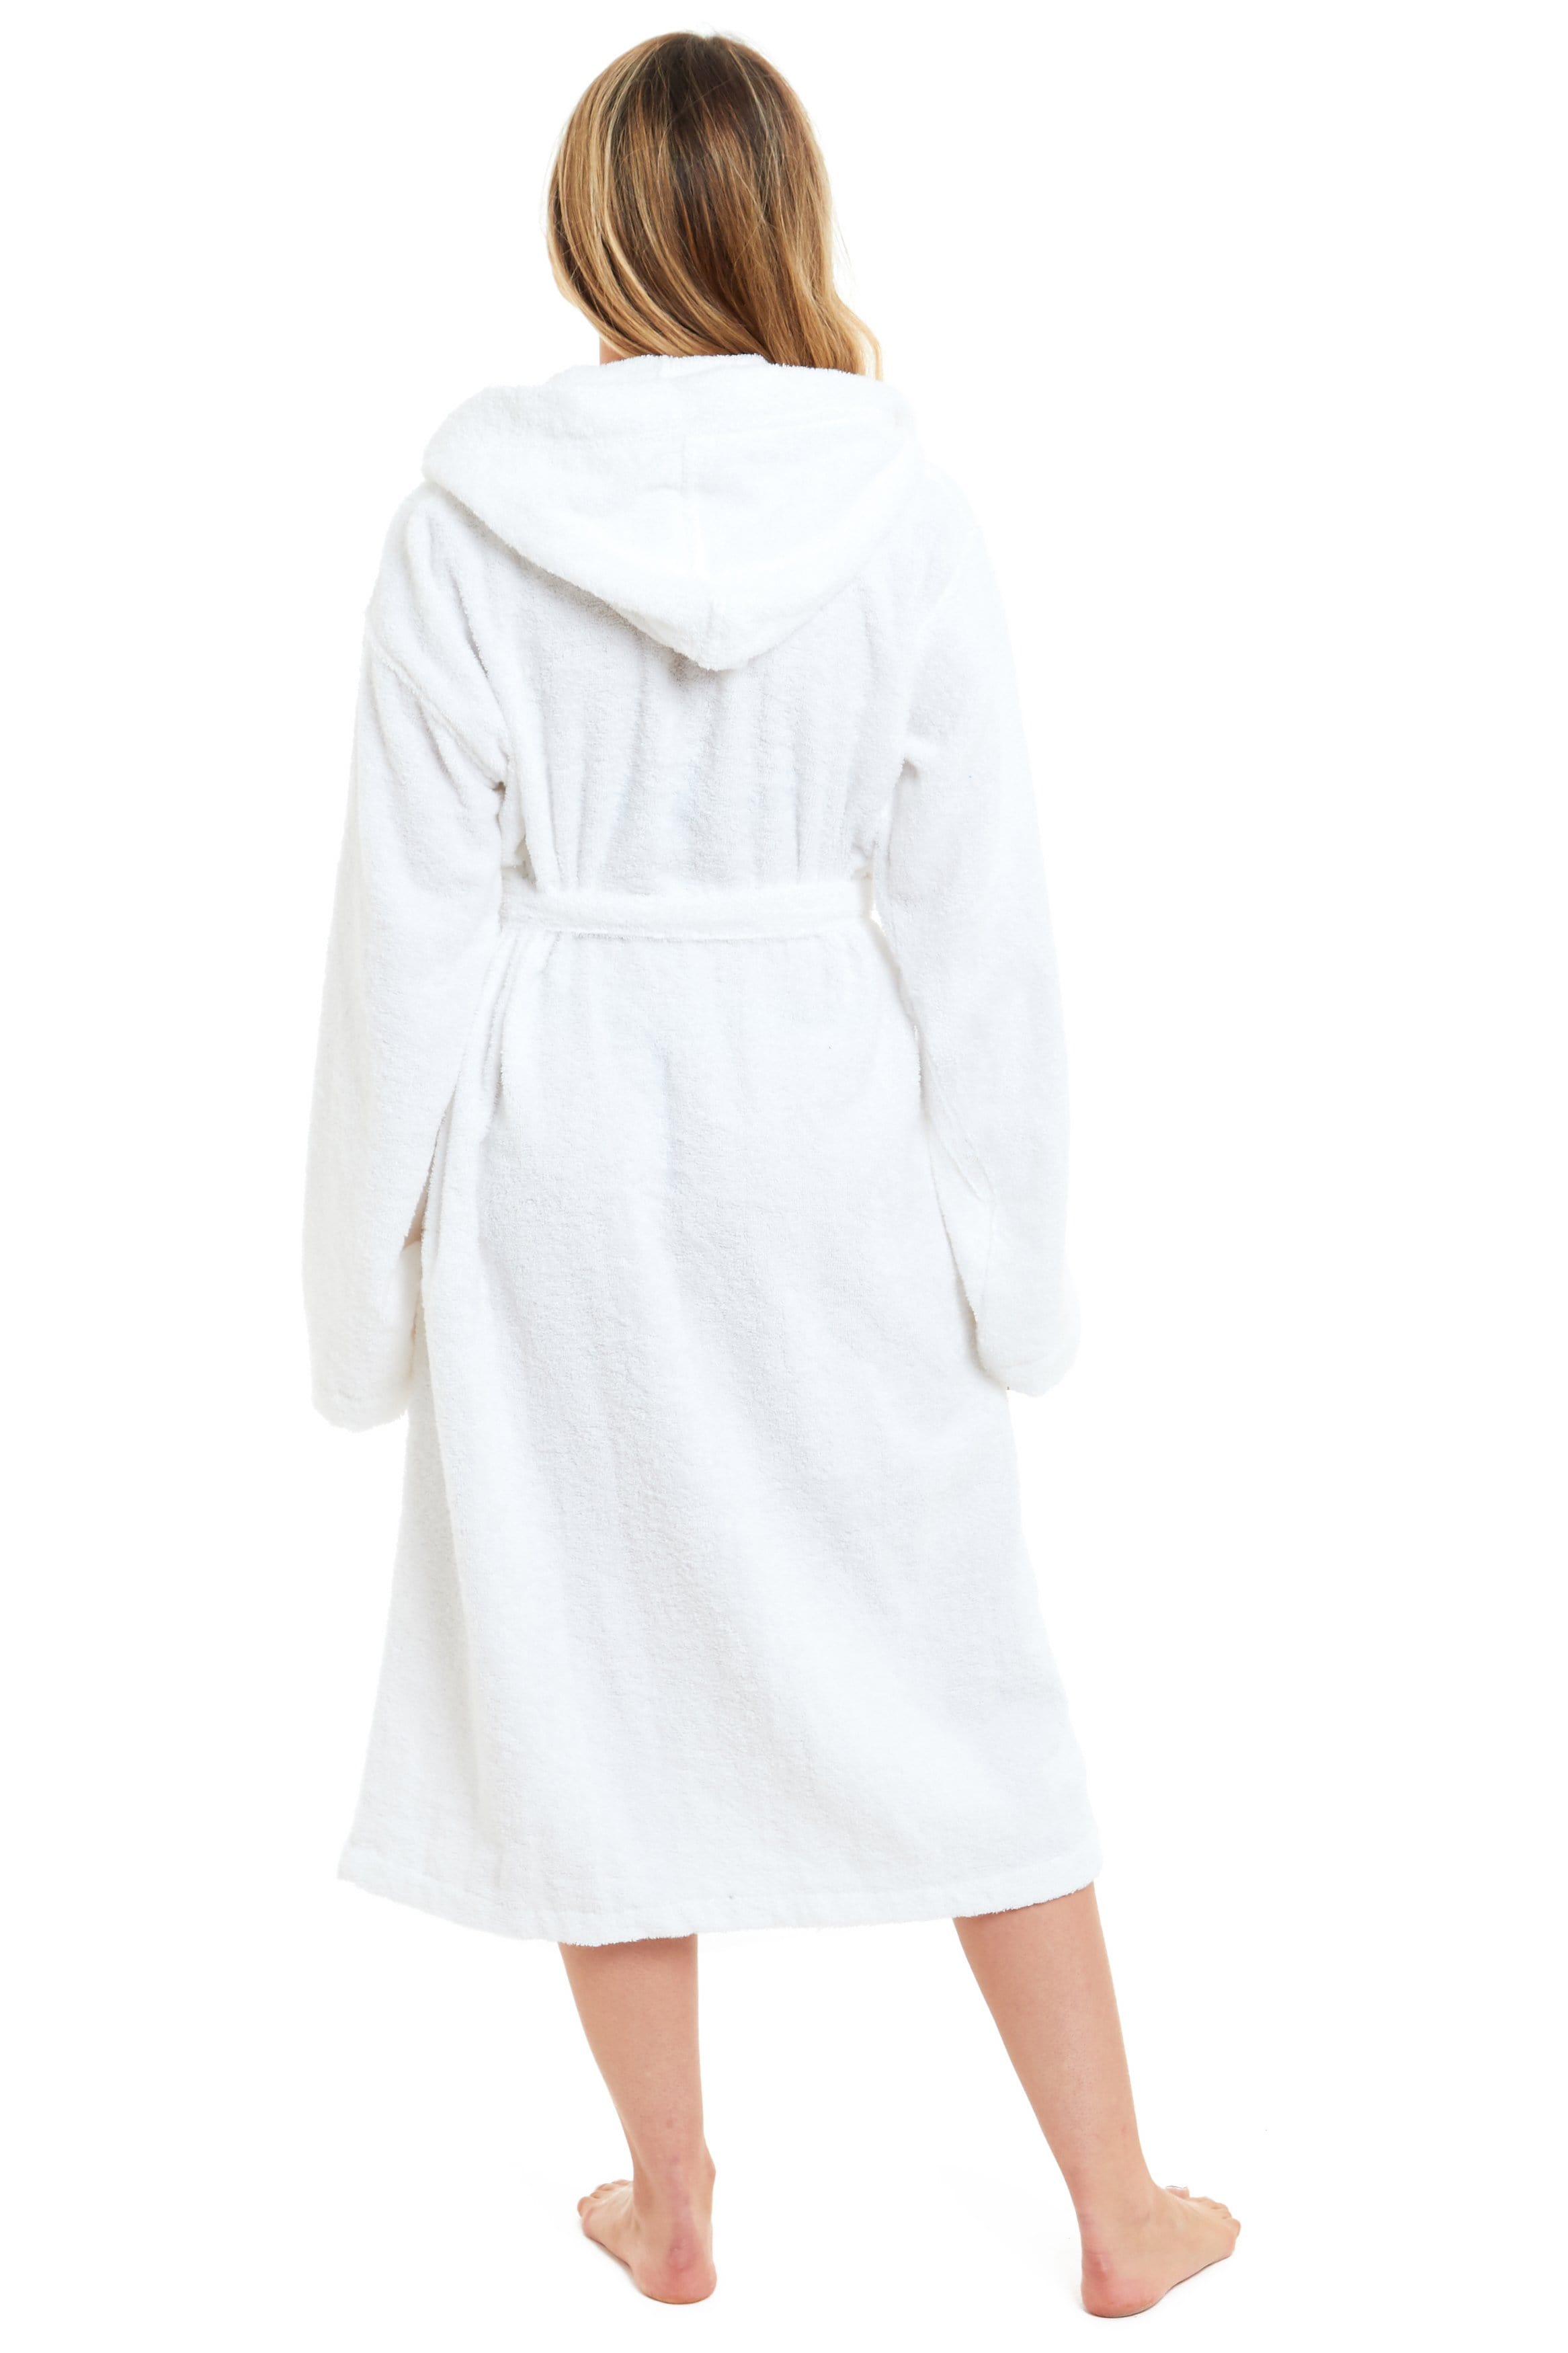 WOMENS LADIES MARKS and Spencer Waffle Tie Knee Length Dressing Gown Pure  Cotton £13.99 - PicClick UK